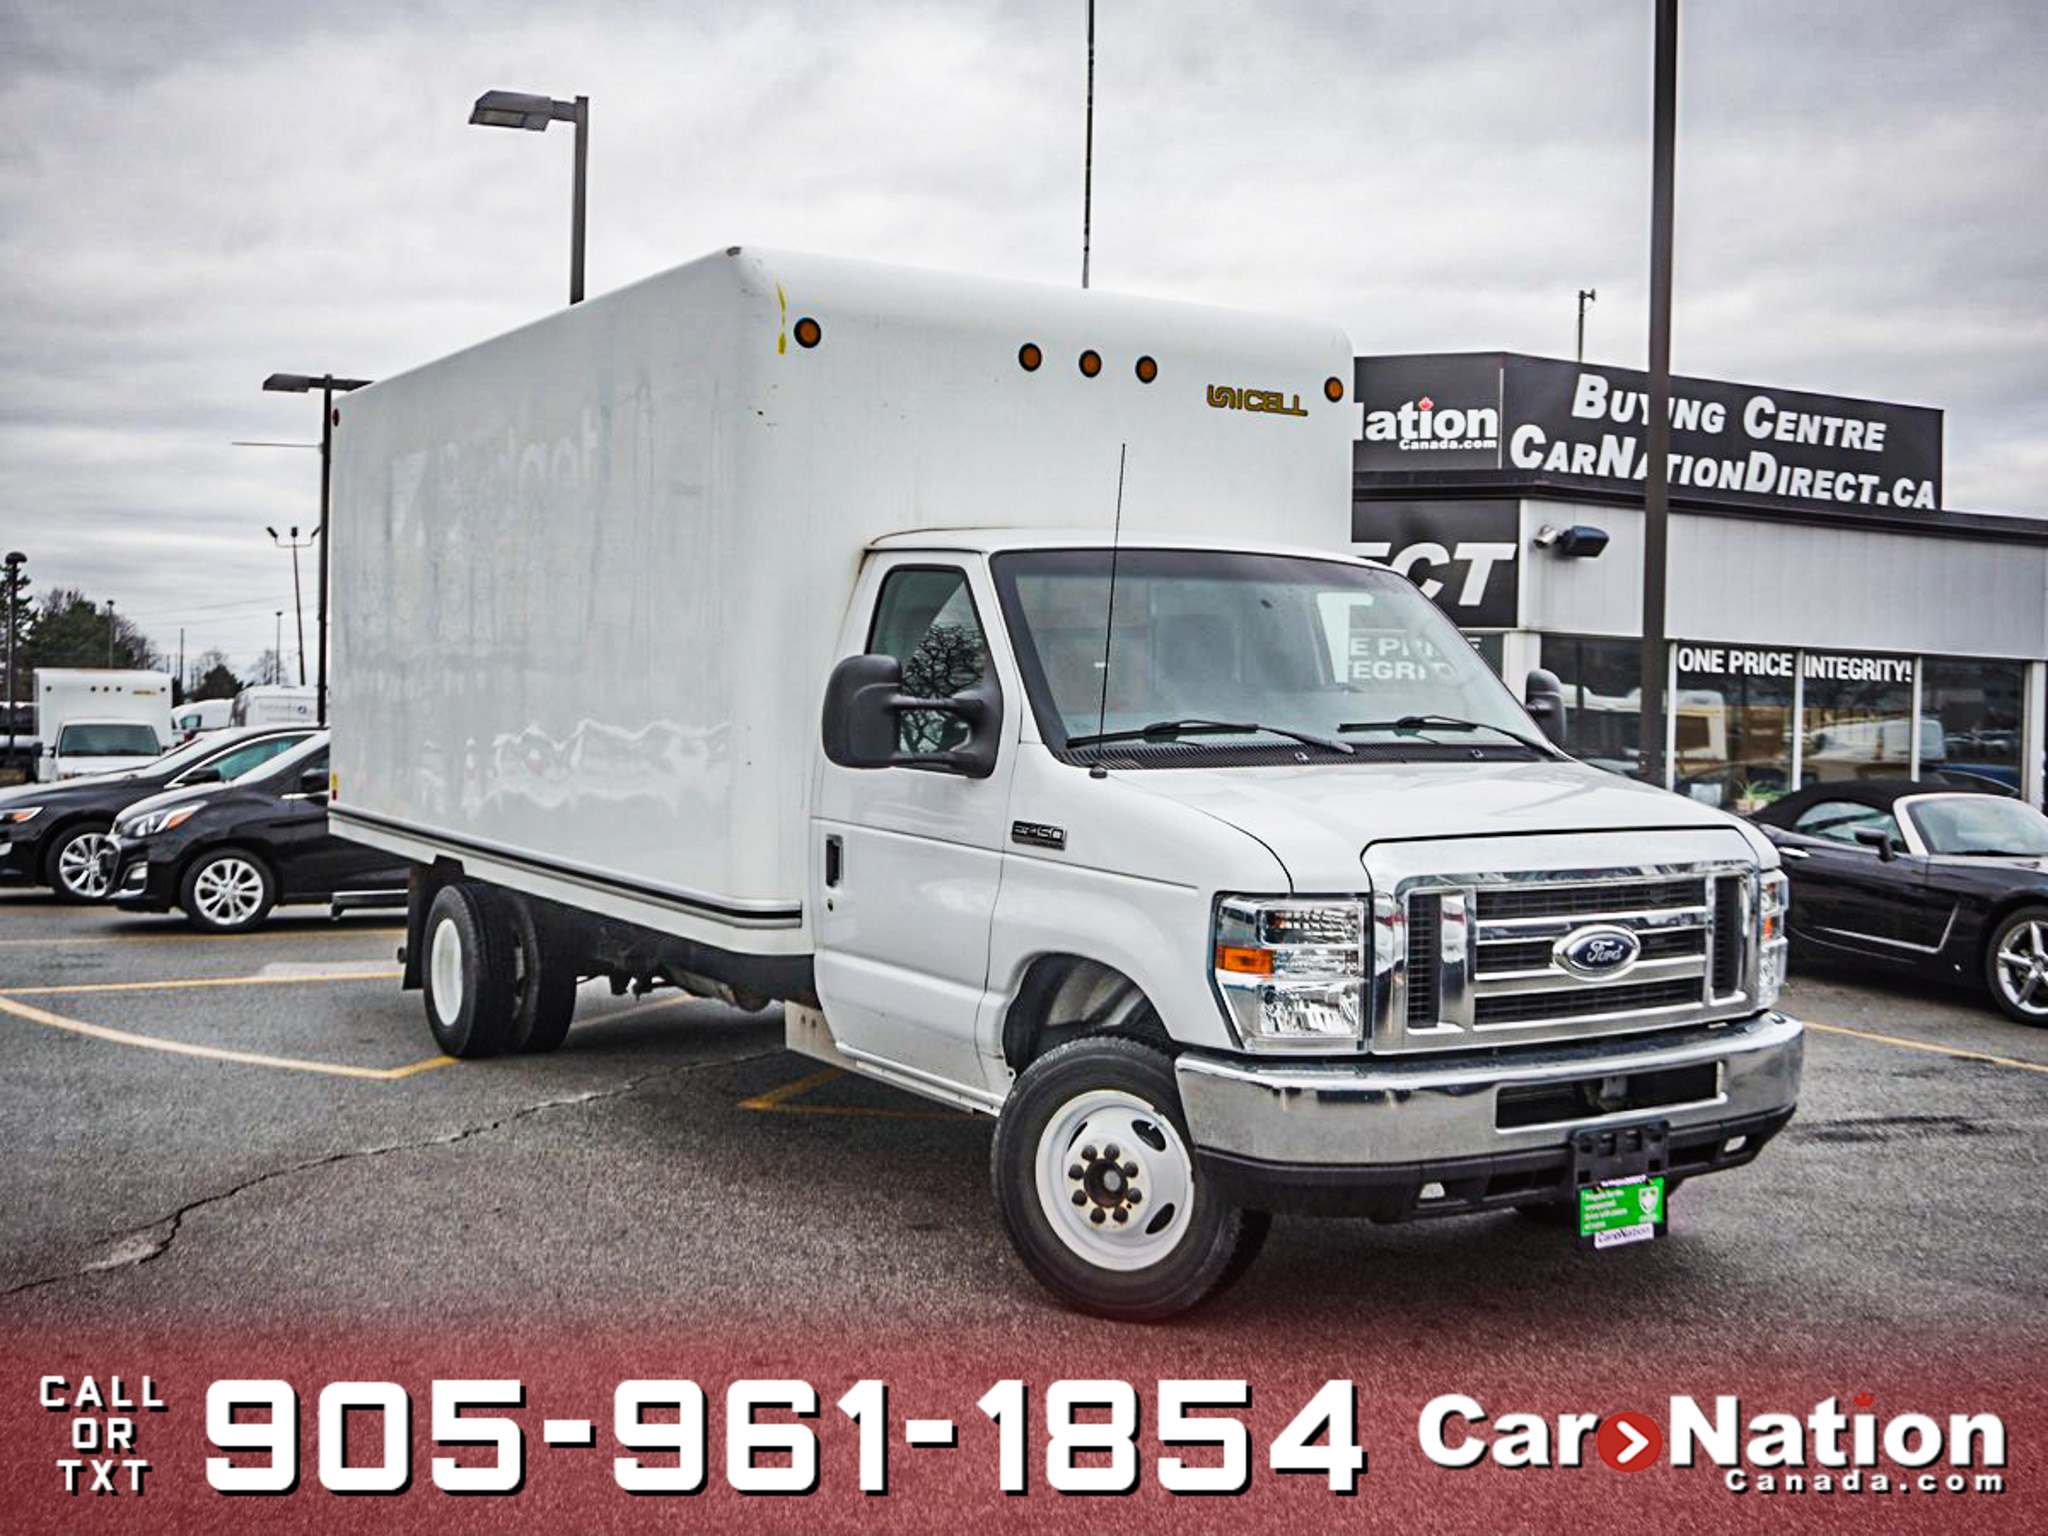 2019 Ford E-Series Cutaway E-450 158 WB| WE WANT YOUR TRADE|